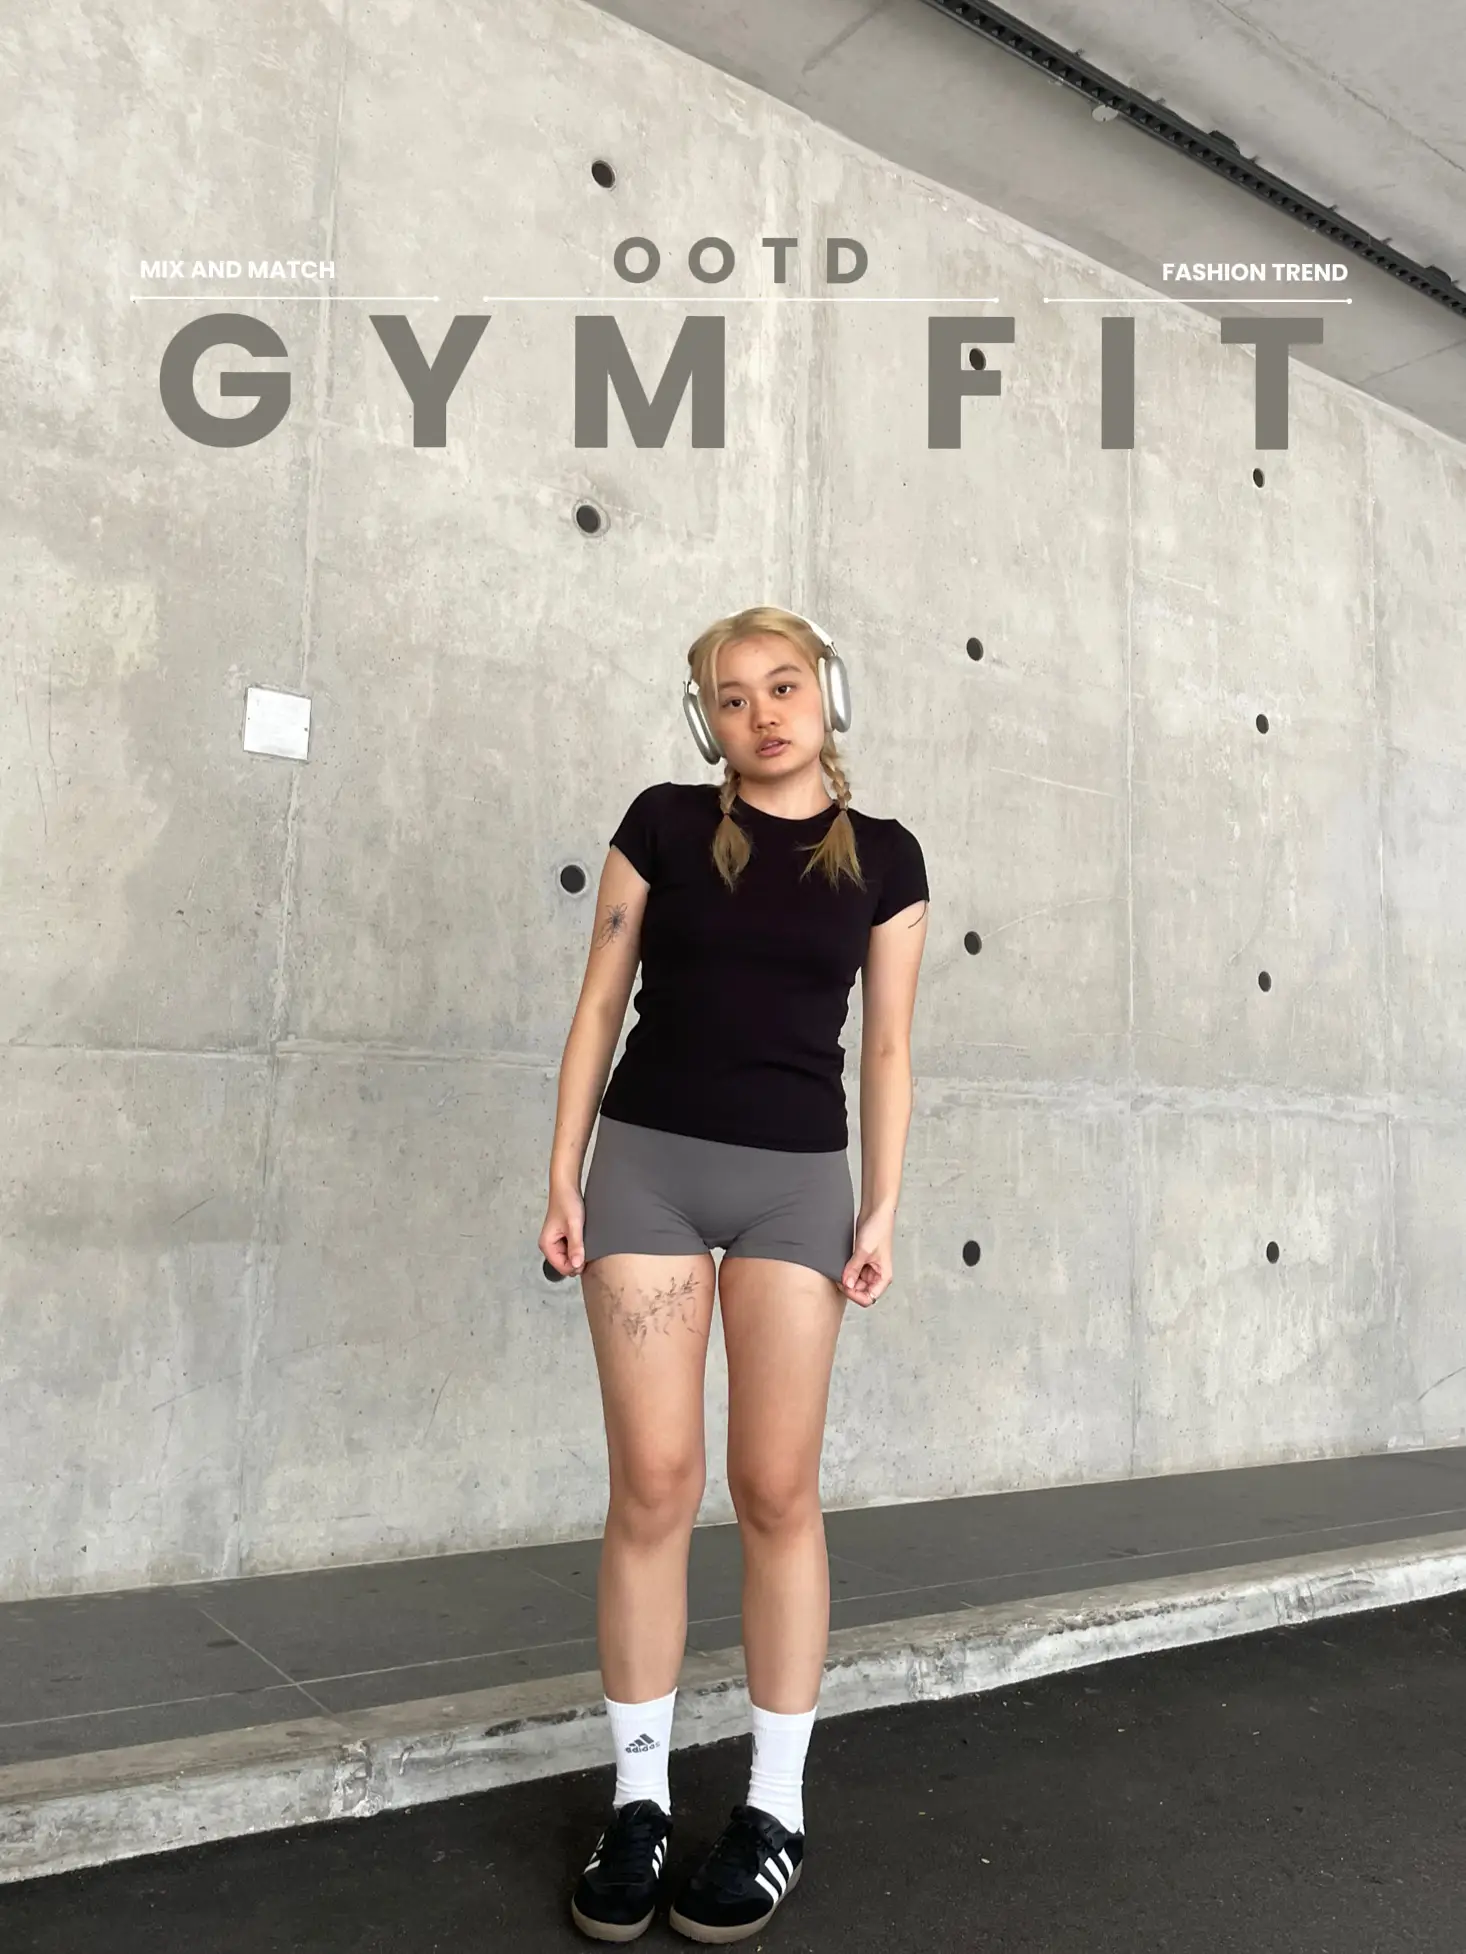 gym fit idea w/o actually going to the gym ✨, Gallery posted by don